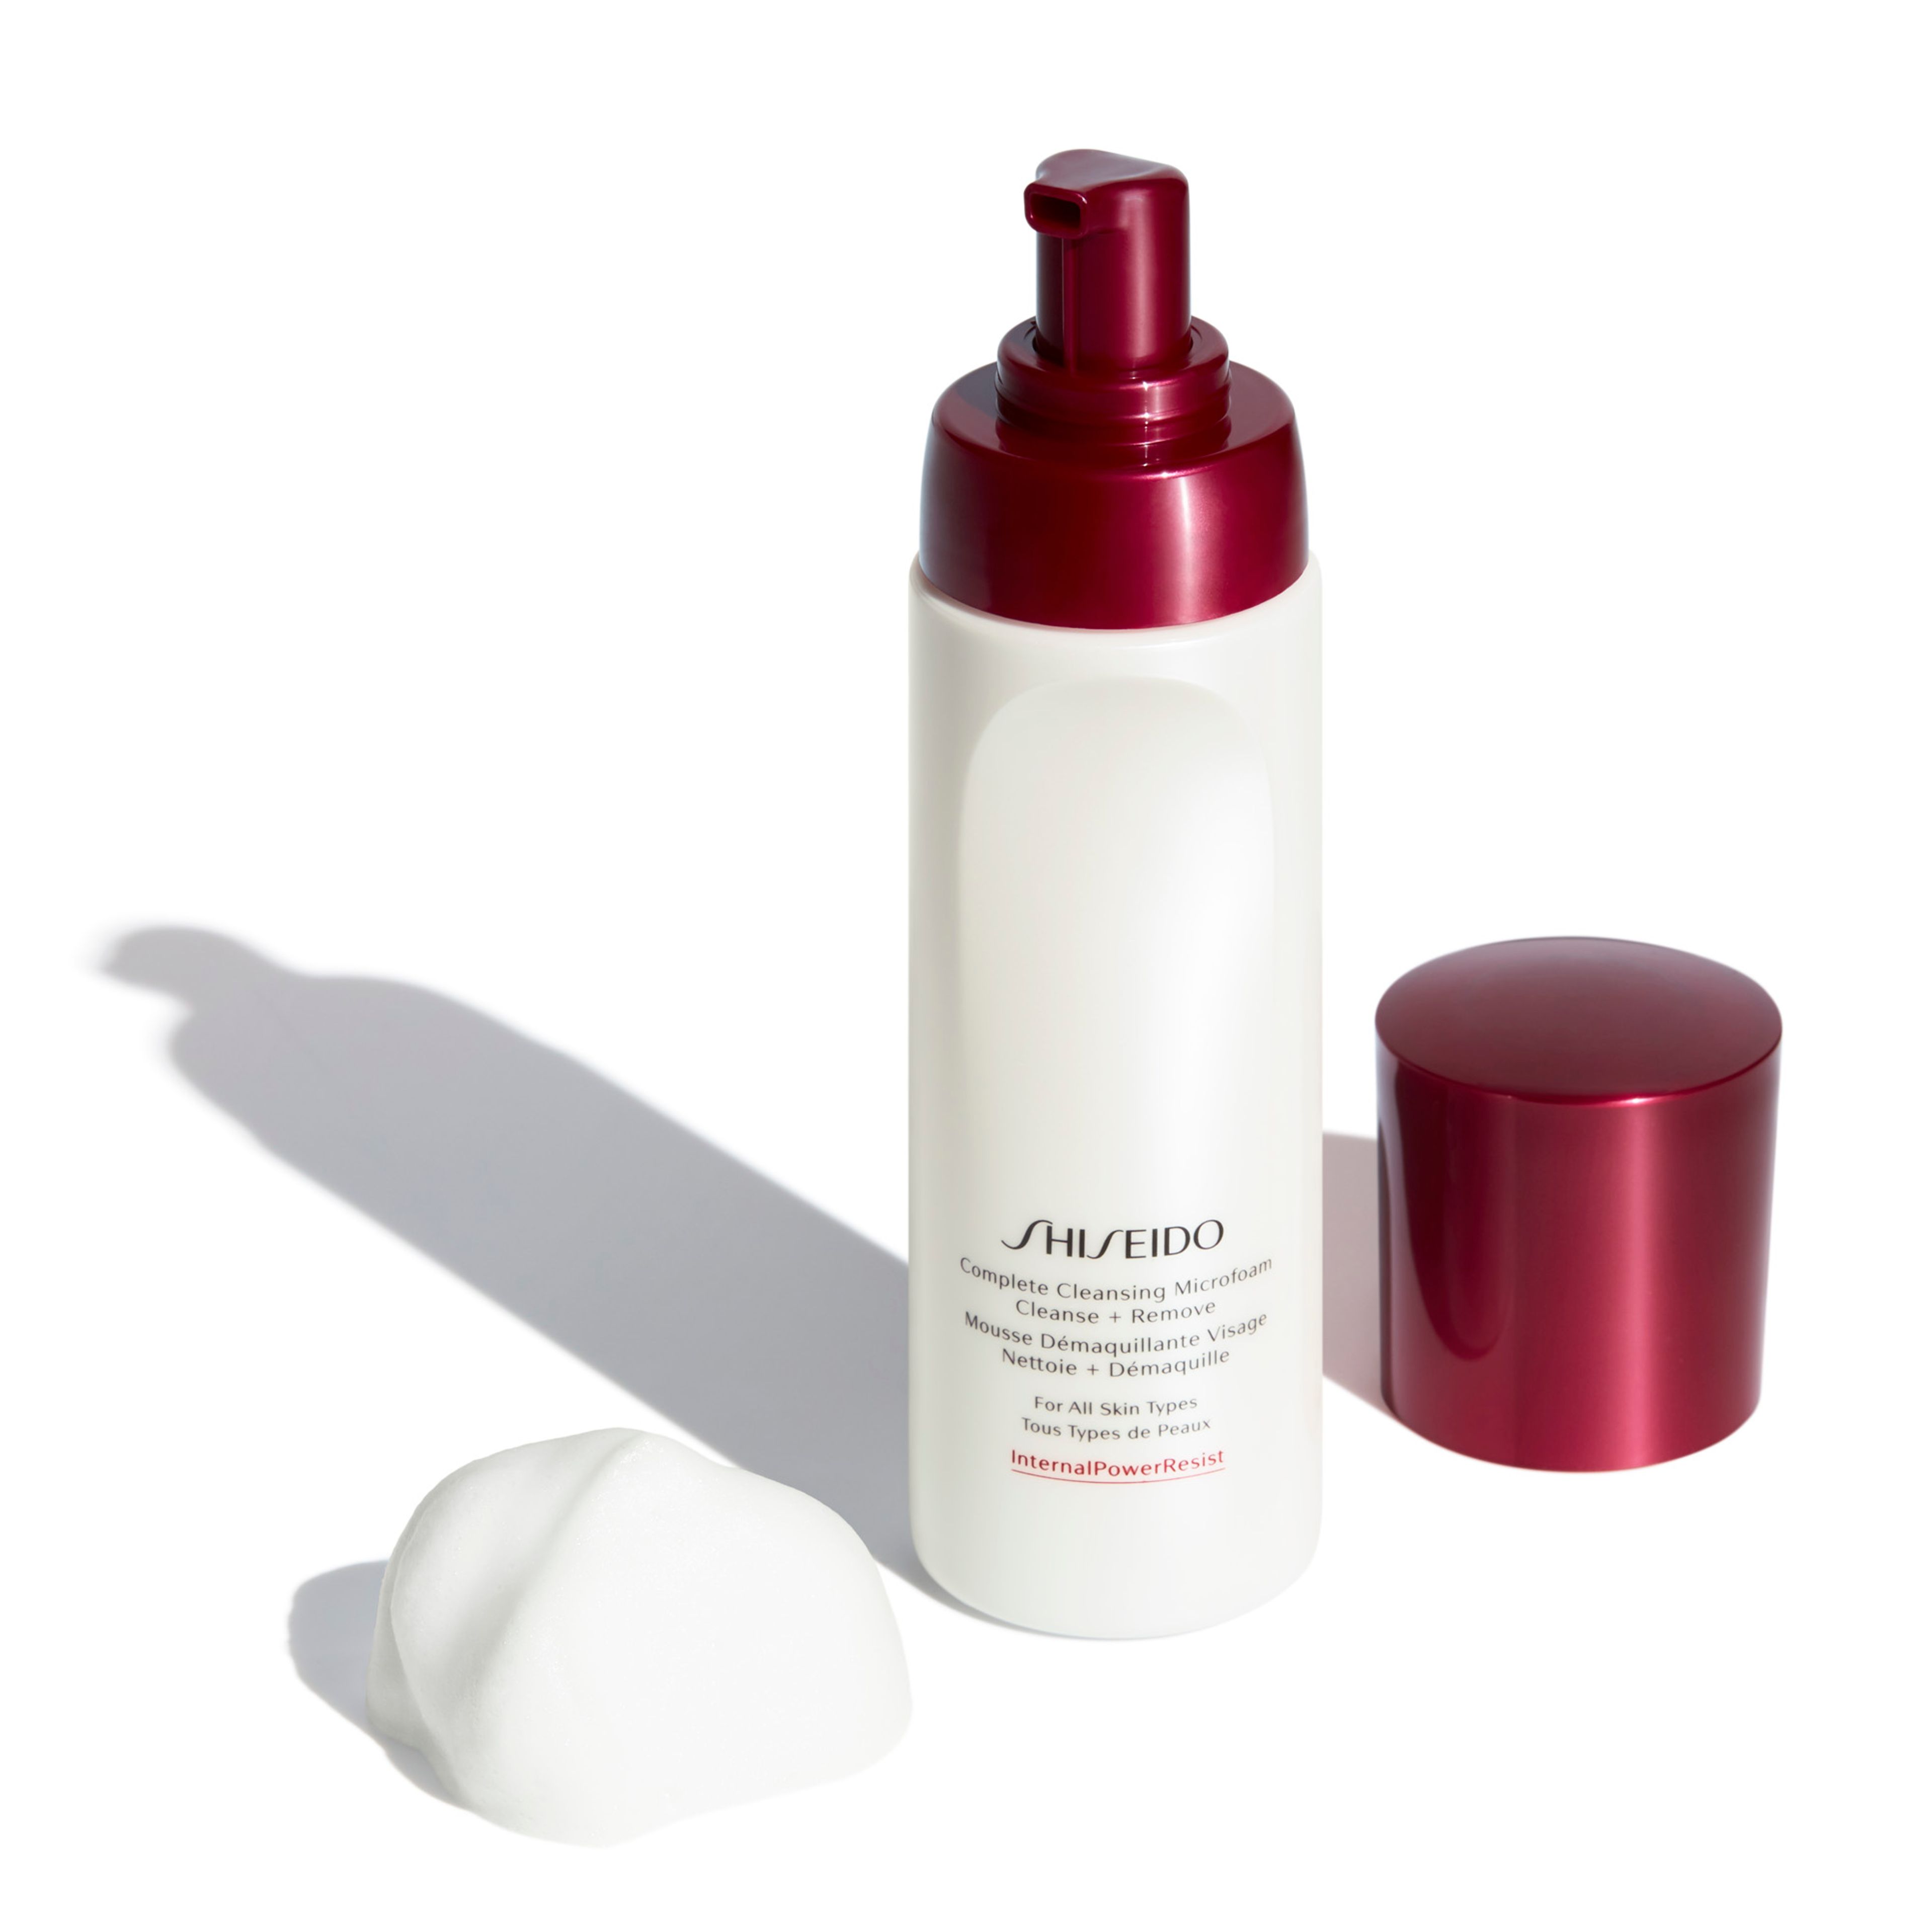 Complete Cleansing Microfoam Shiseido 2